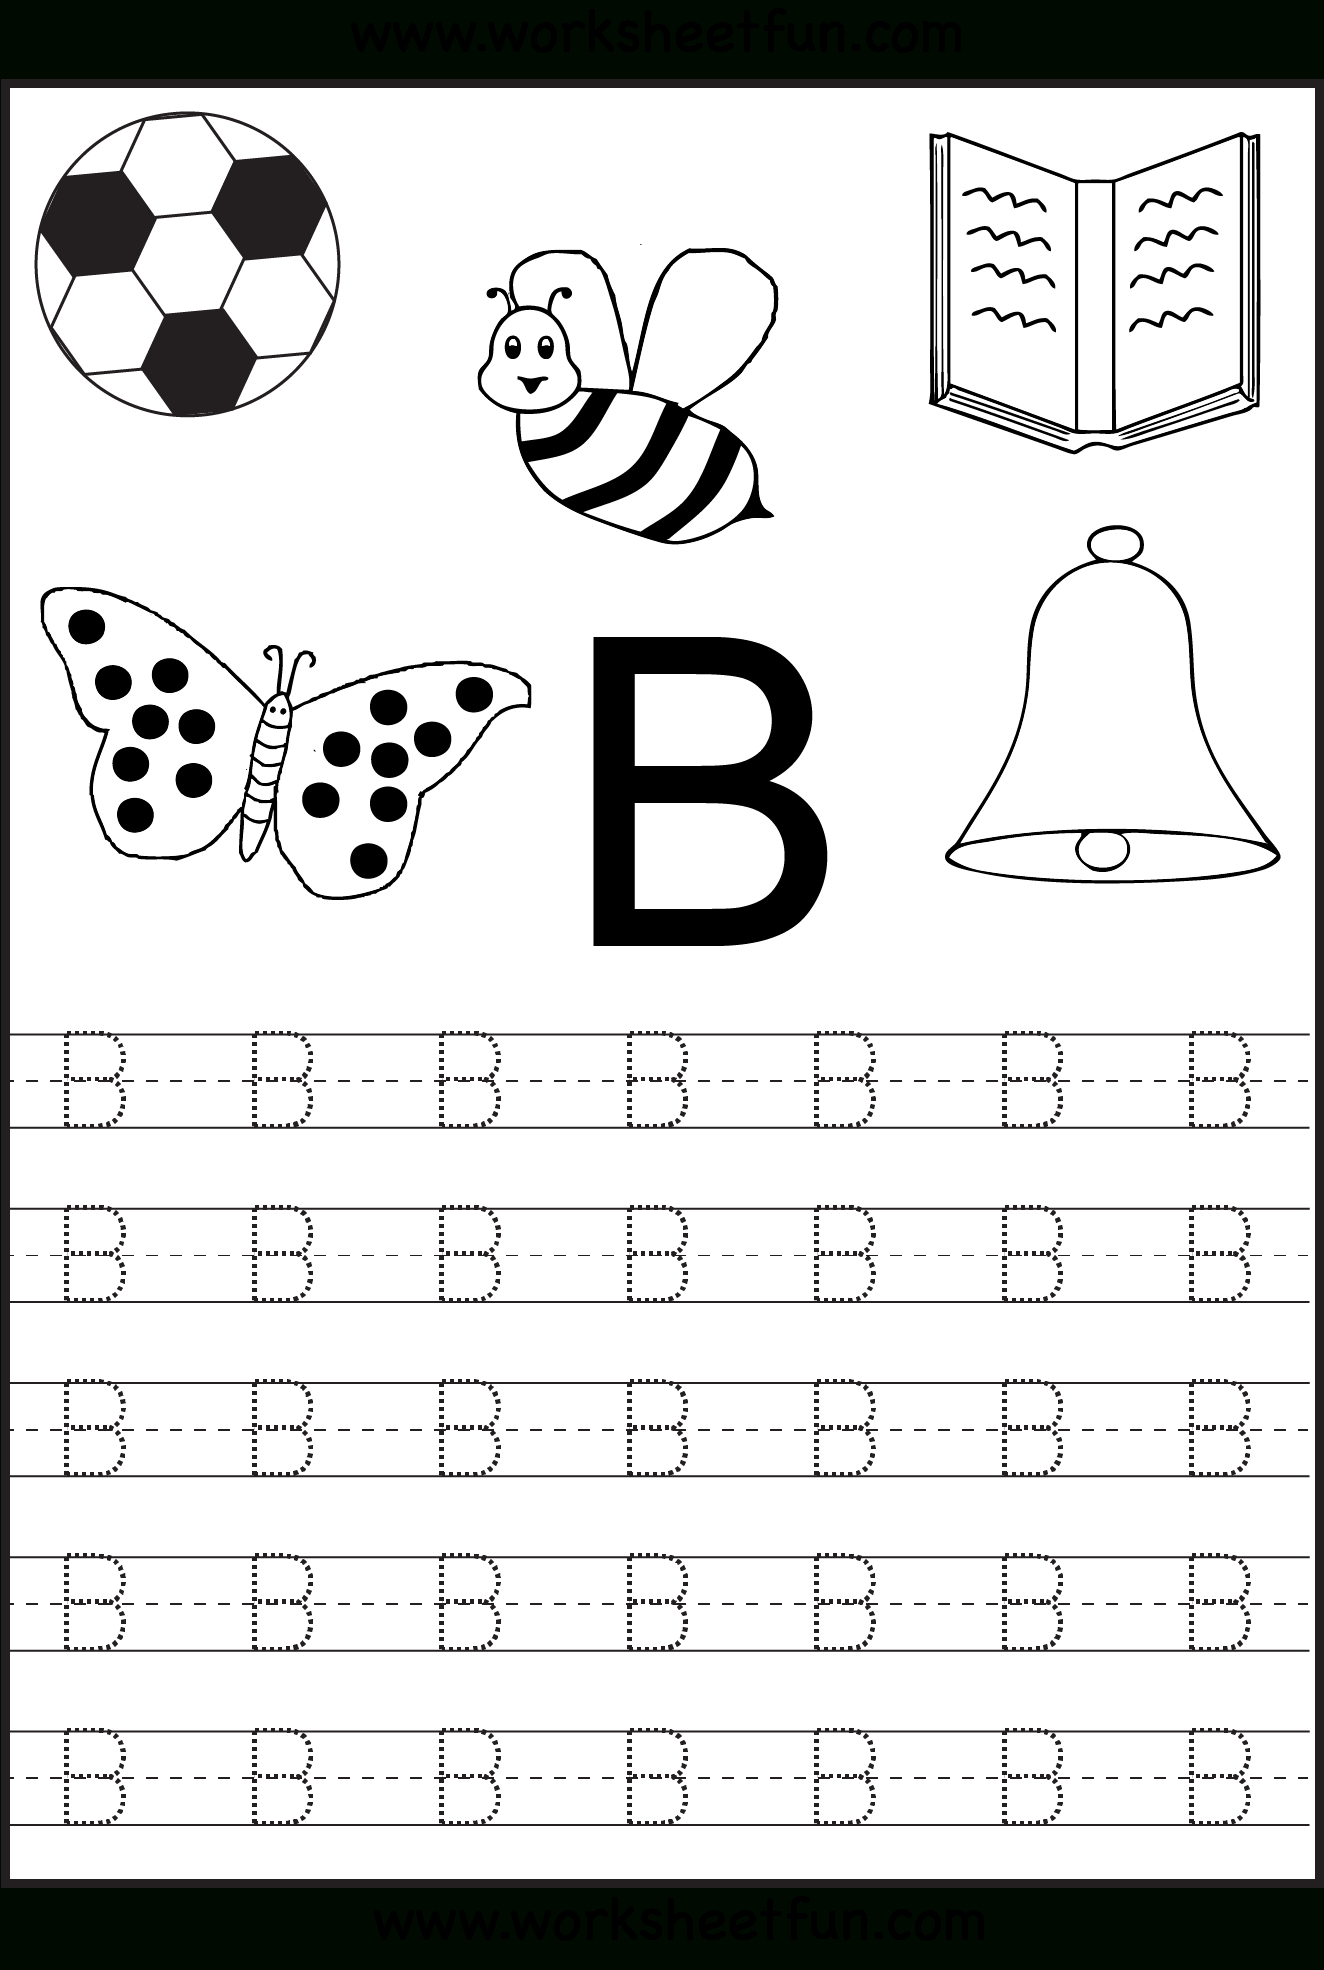 Free Printable Letter Tracing Worksheets For Kindergarten pertaining to Tracing Letter Worksheets Preschool Free